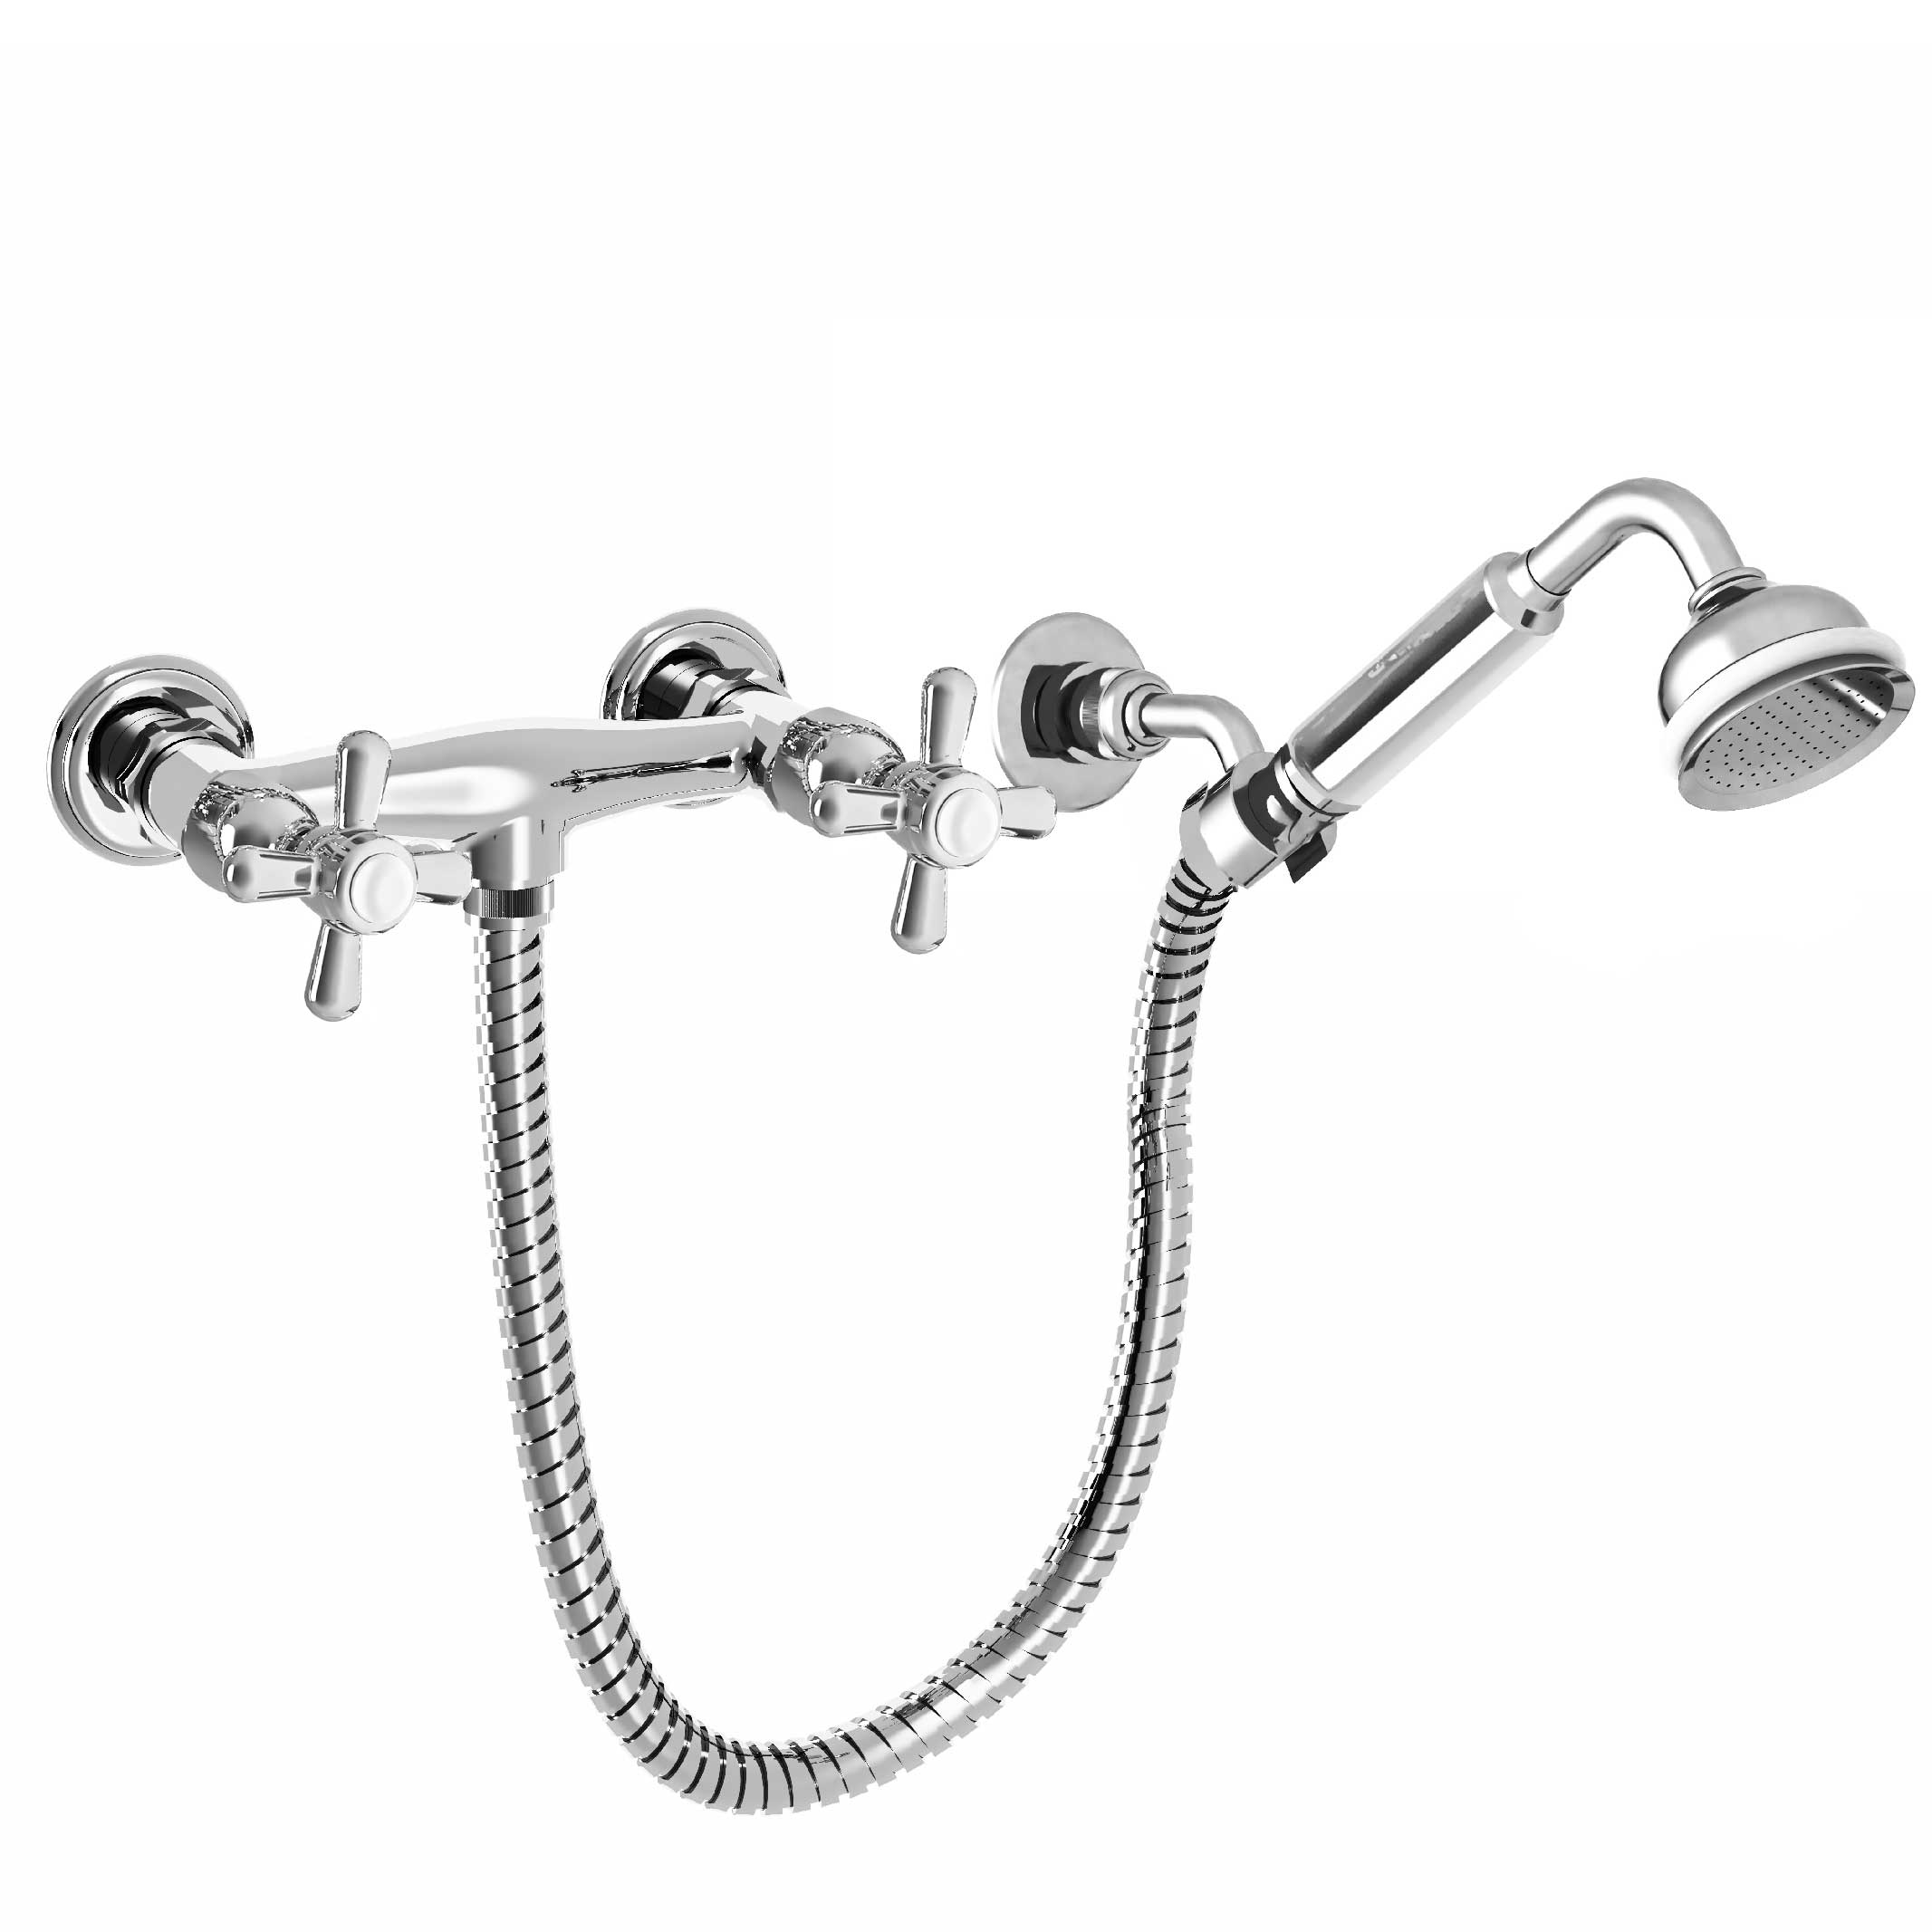 M40-2201 Shower mixer with hook